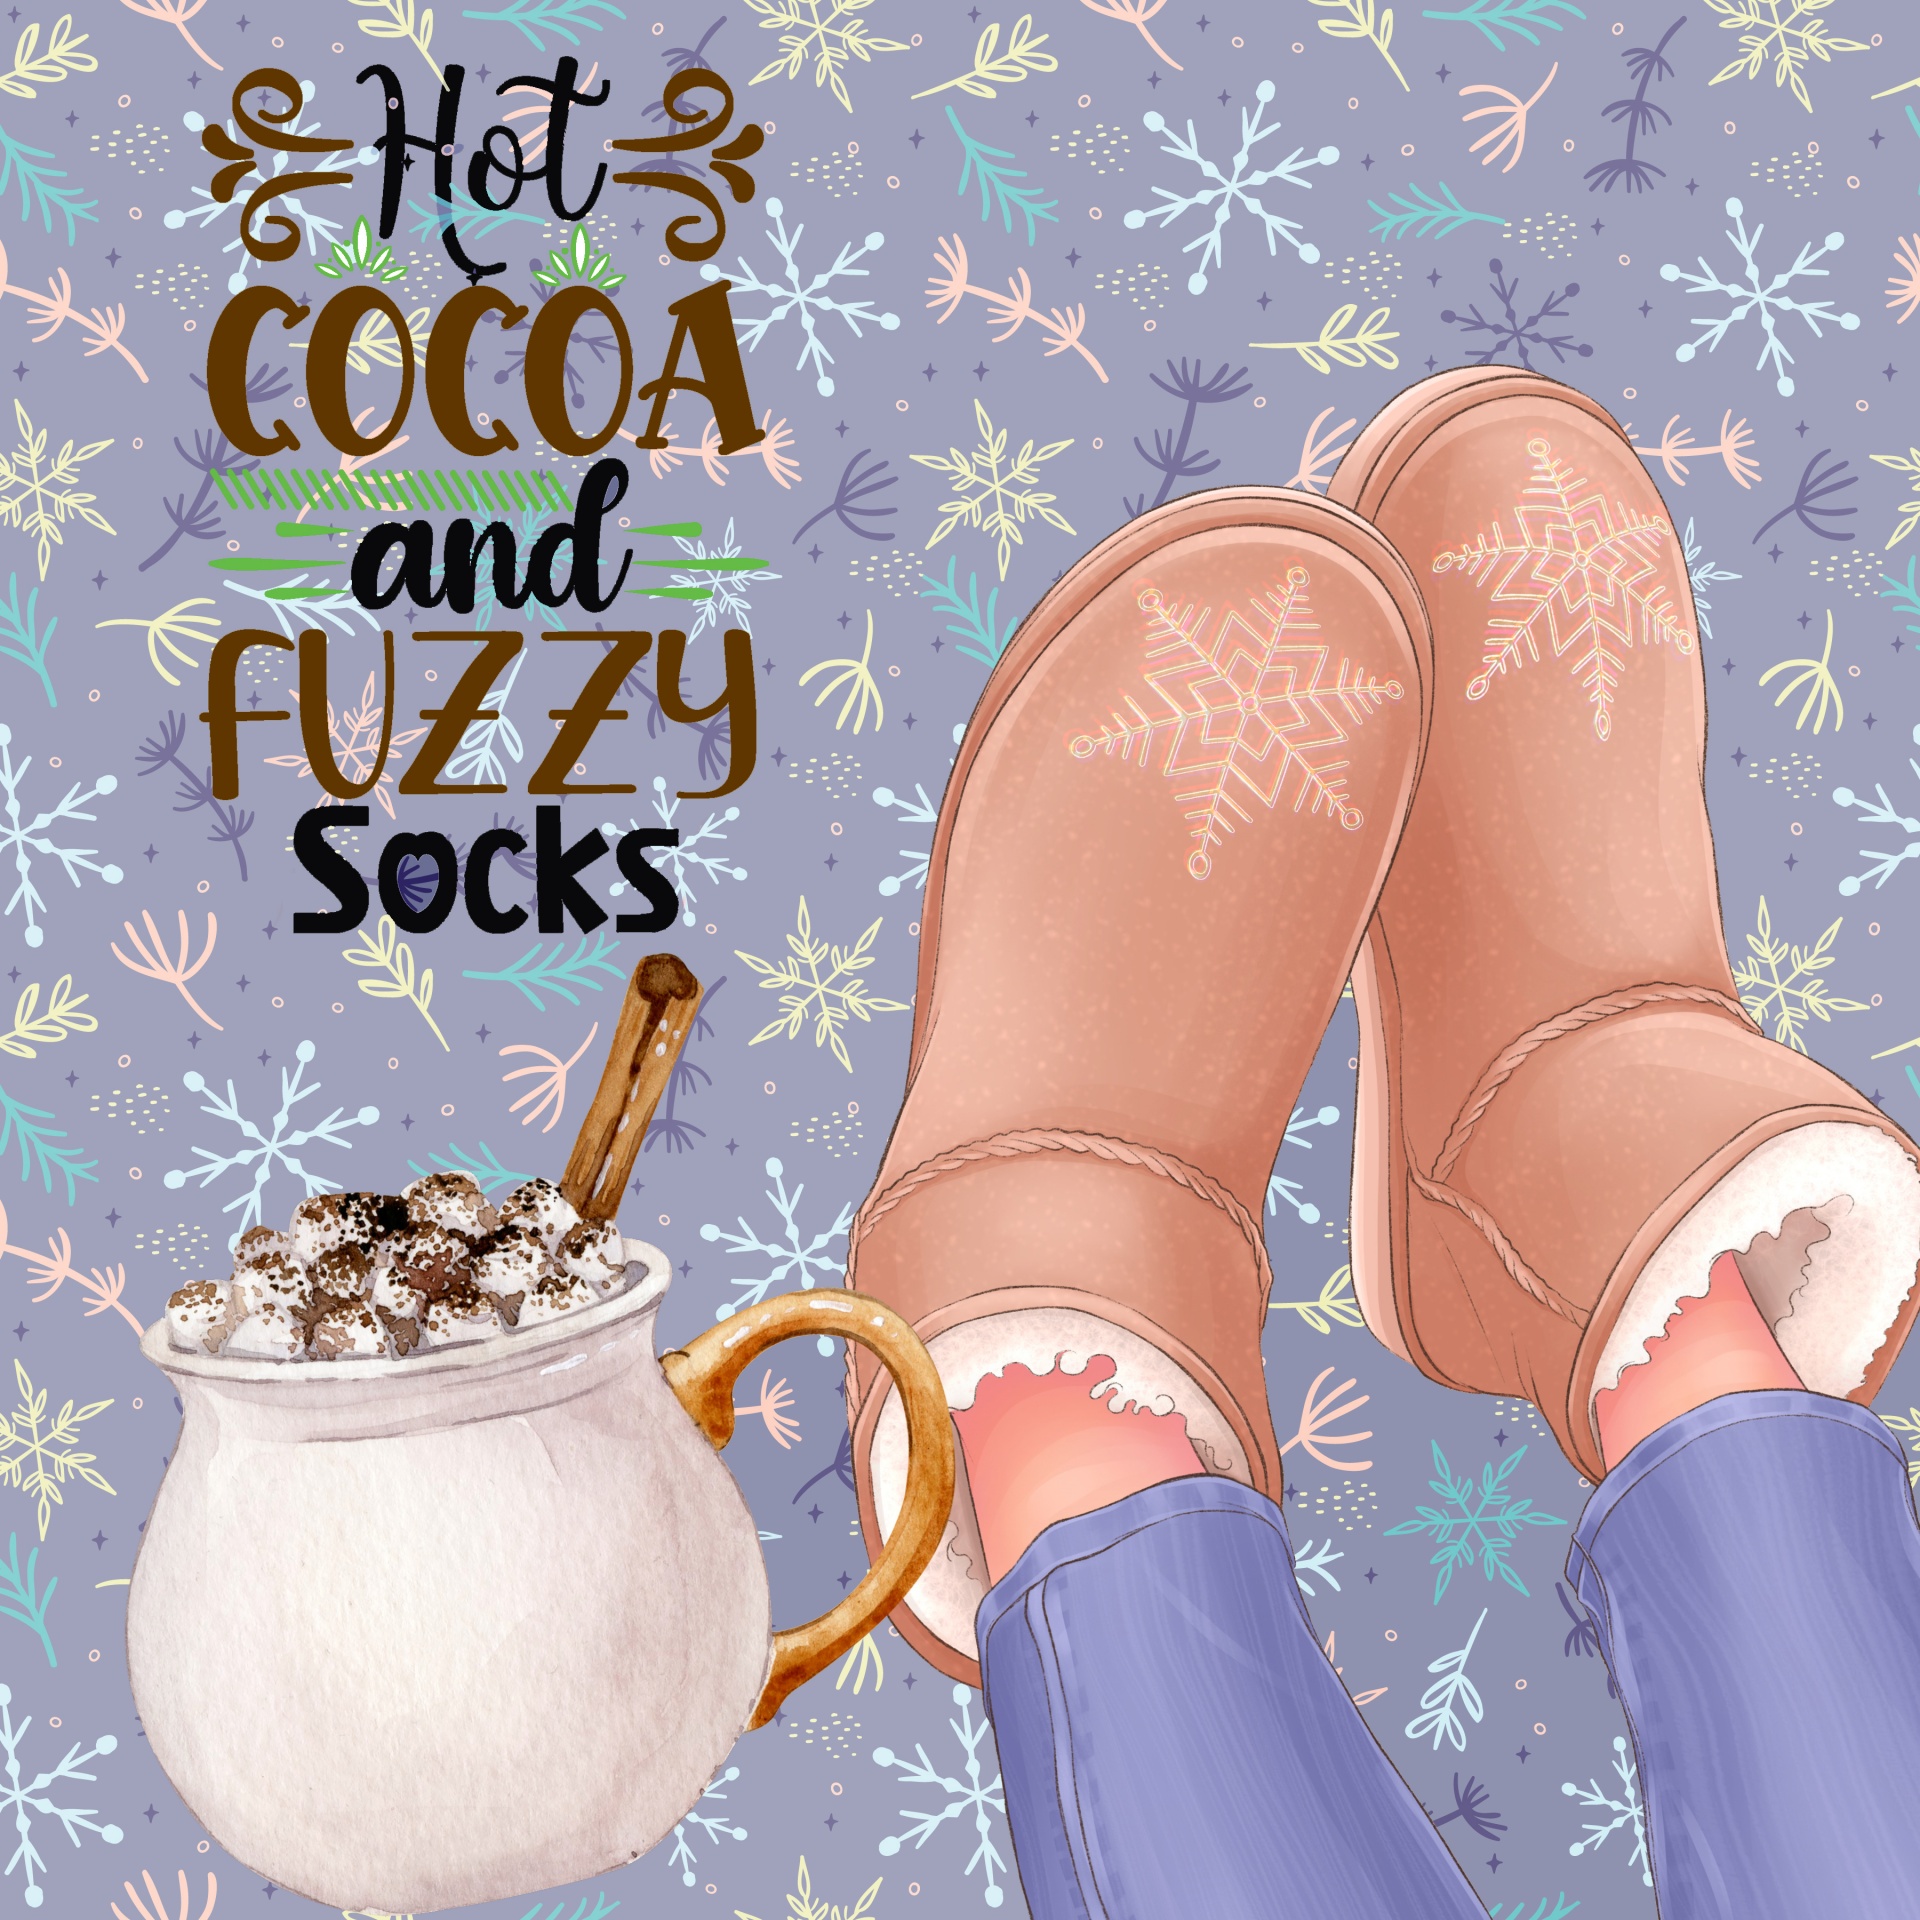 darling illustration of feet wearing fuzzy sock boots and a cup of hot chocolate with words hot cocoa and fuzzy socks